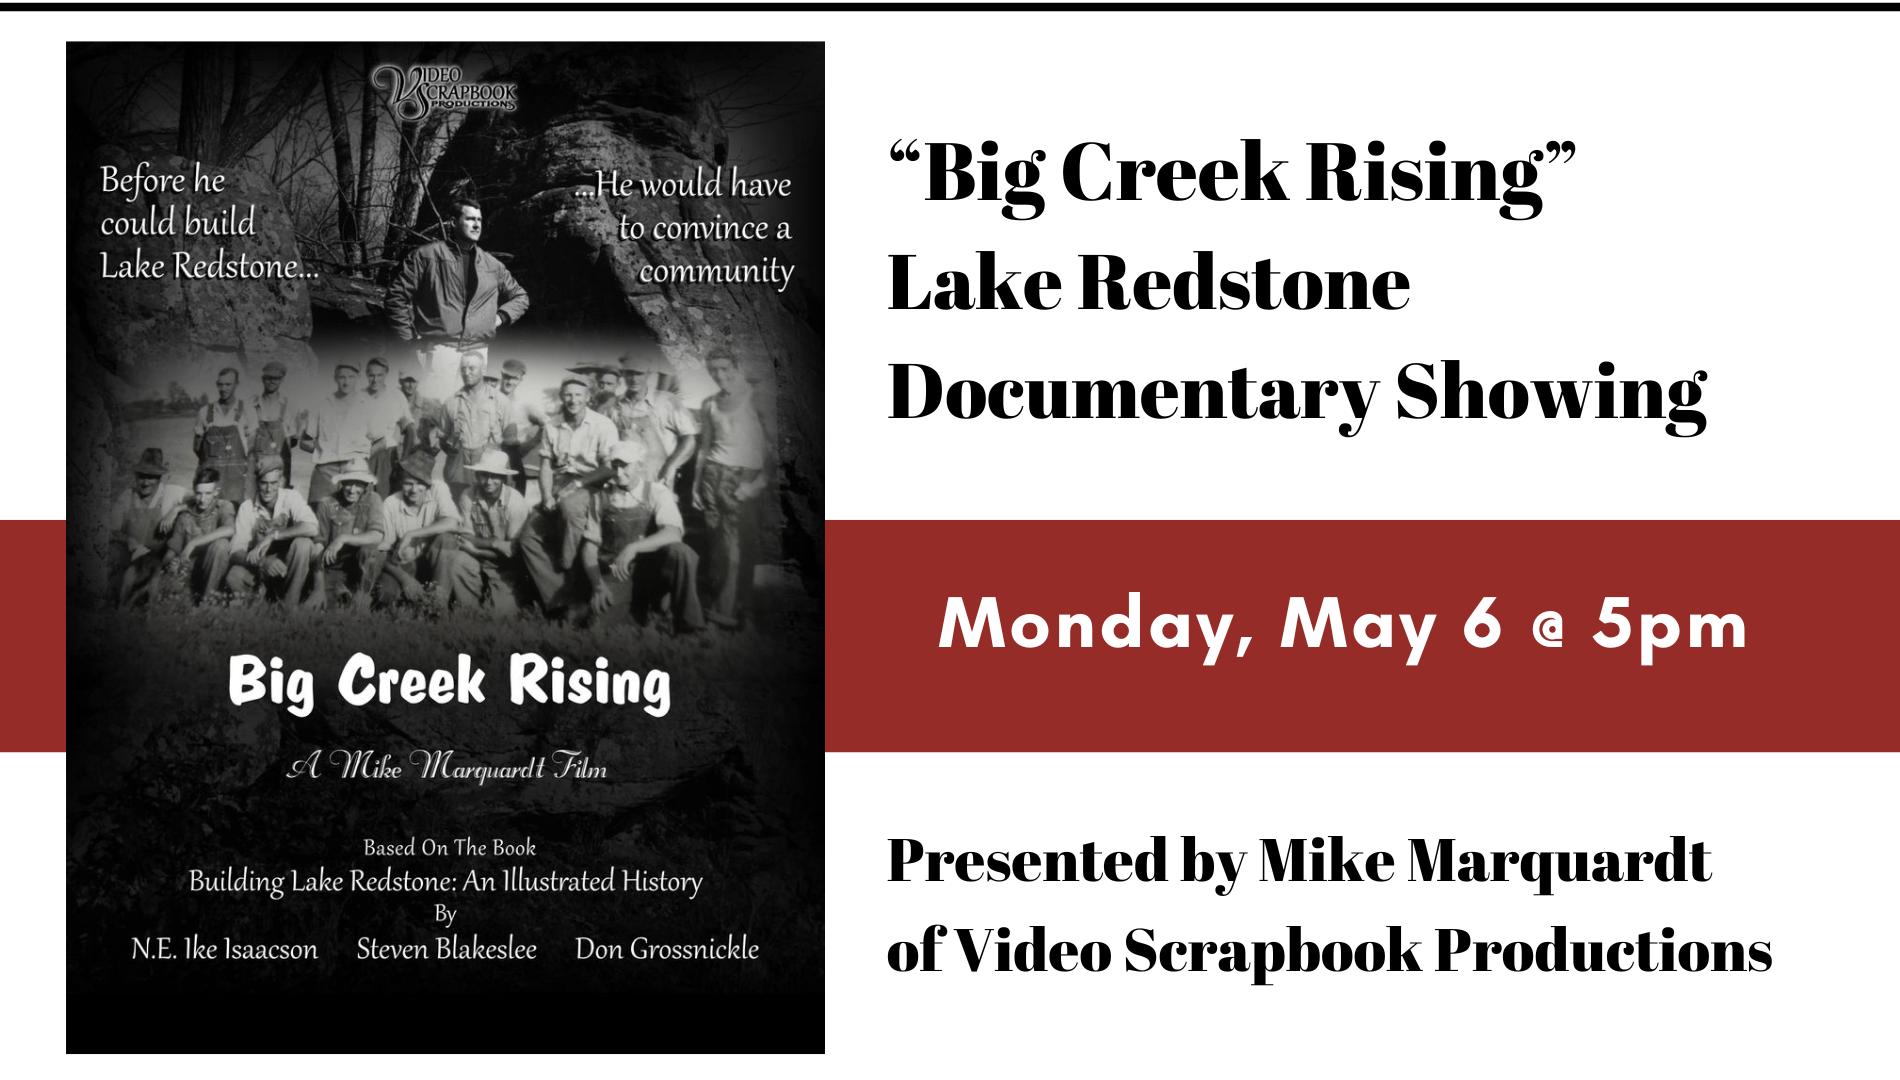 Big Creek Rising Film Documentary Showing at the Library